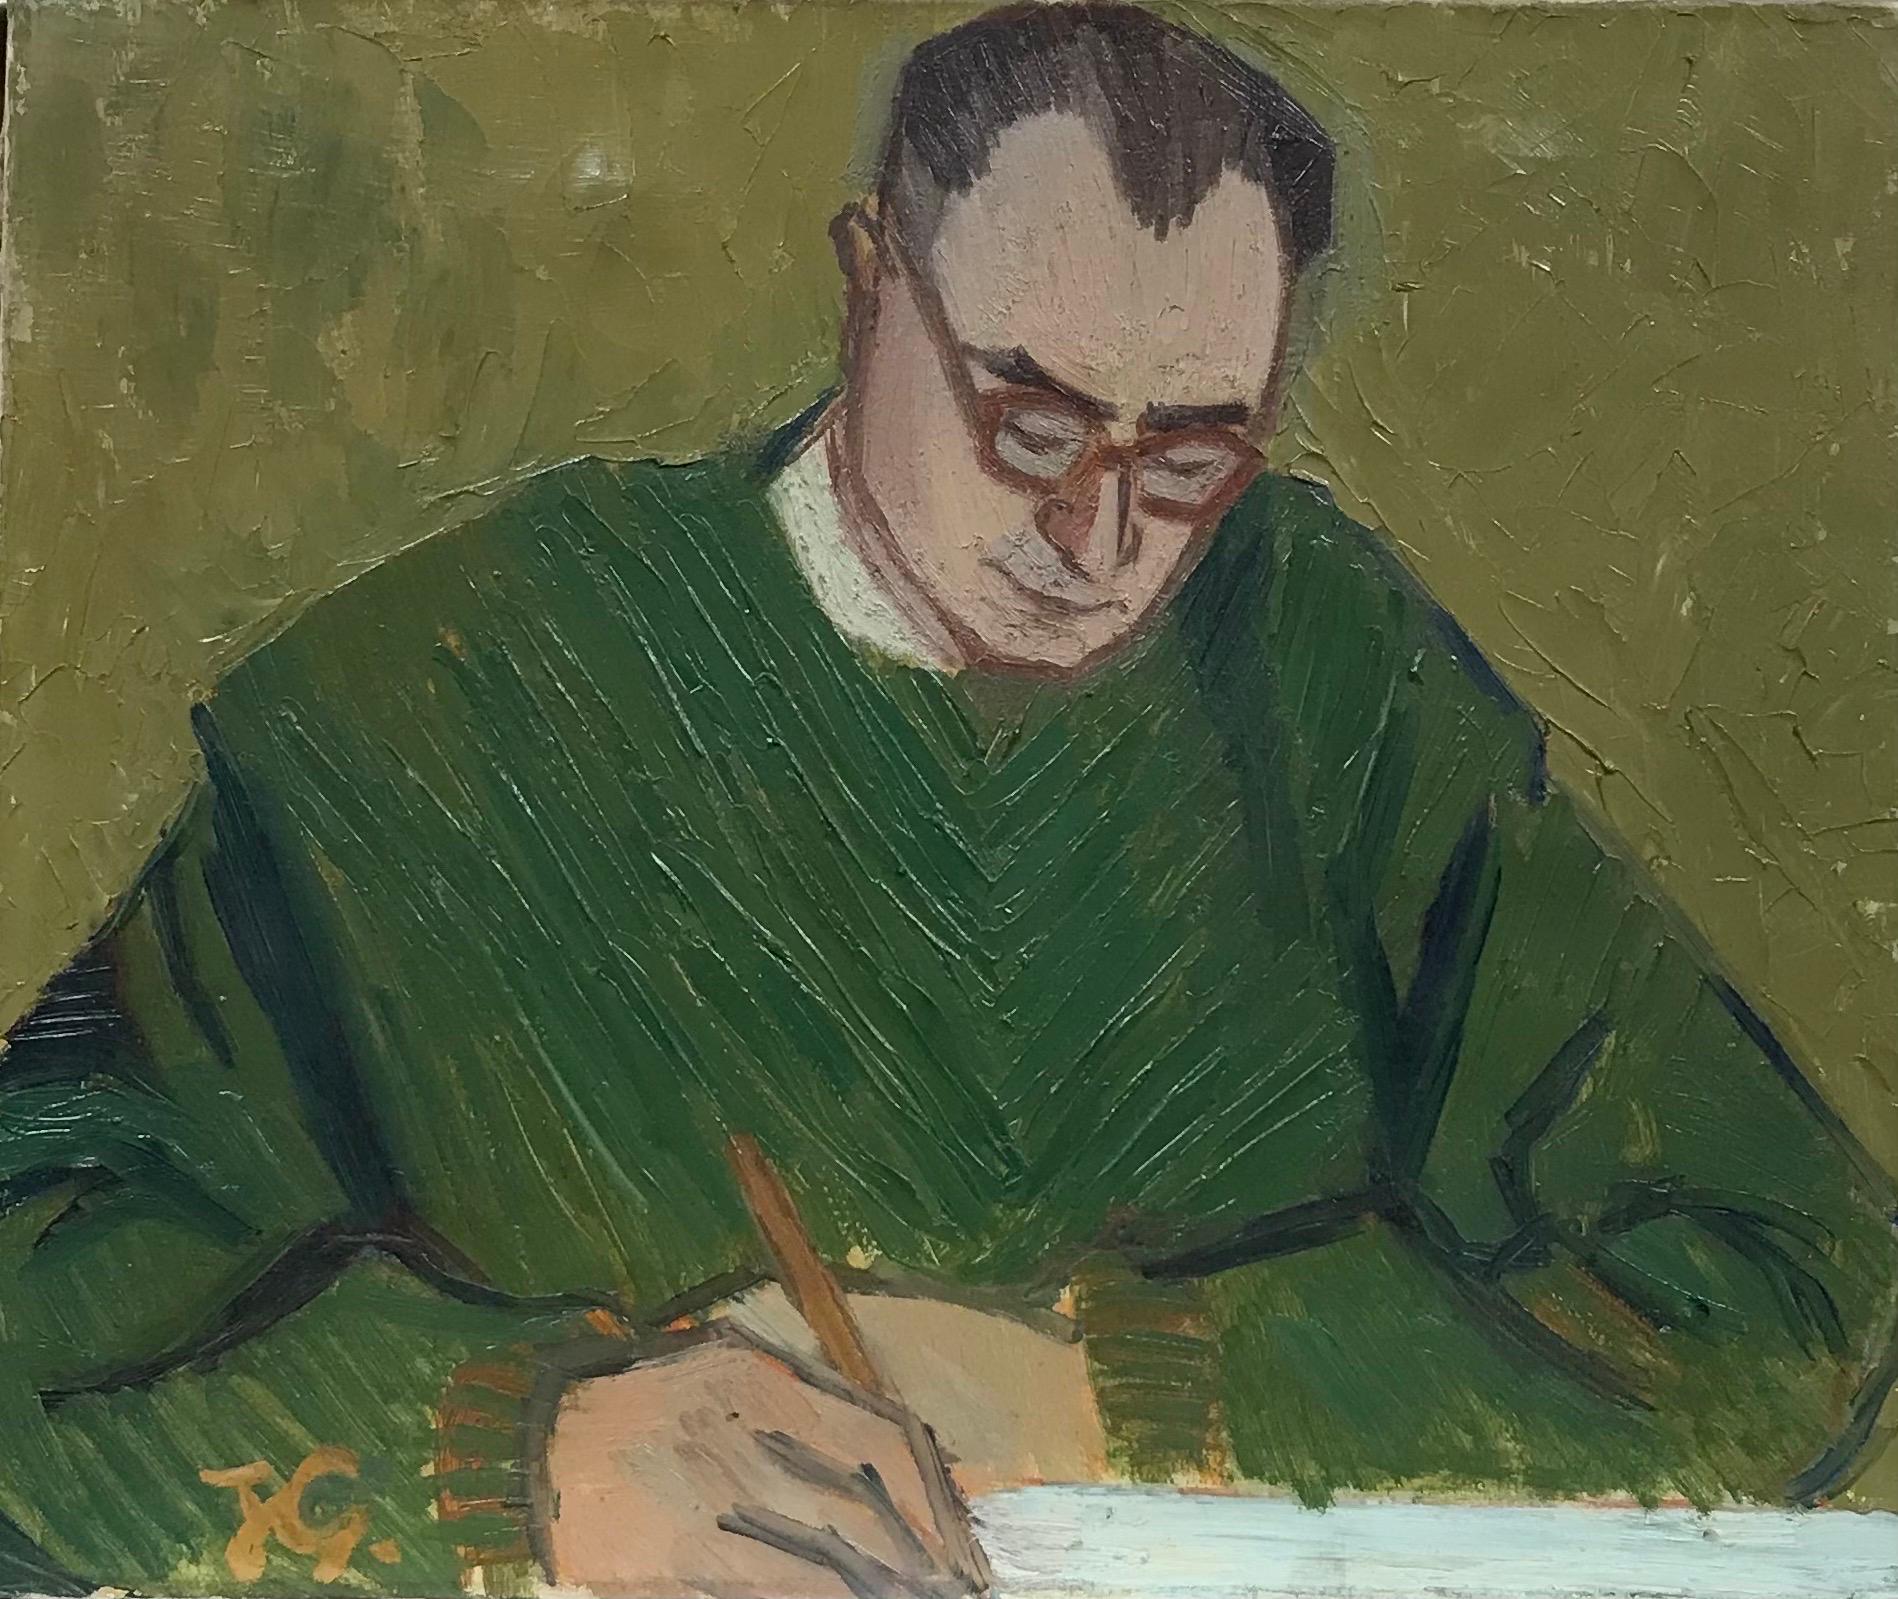 Mid 20th Century French Post-Impressionist Oil - Portrait of Man Writing at Desk